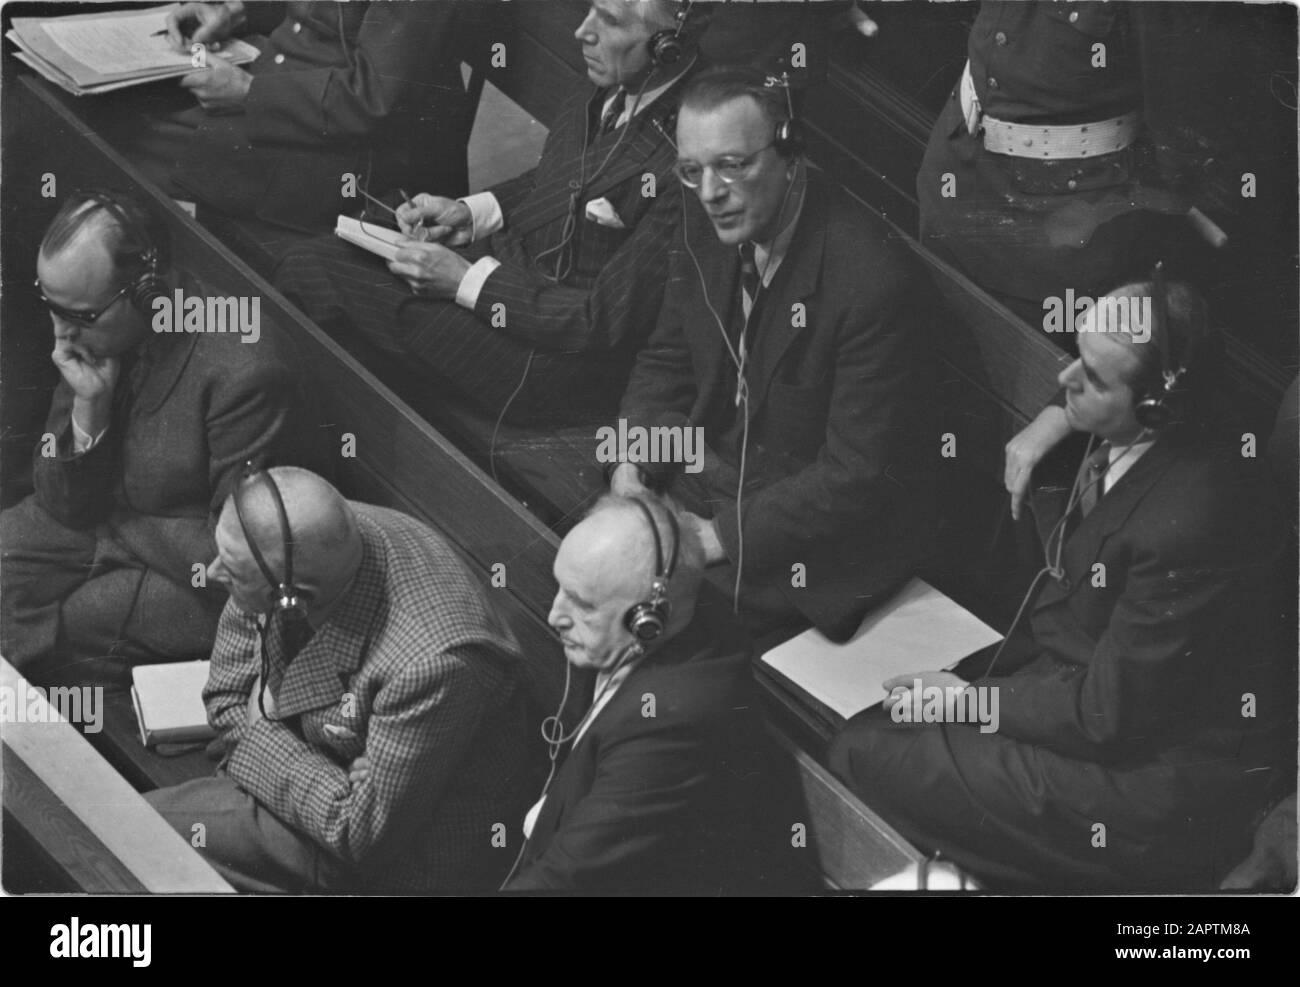 The trial of Nuremberg against leaders of the Nazi regime. To the right of the middle (with glasses) Arthur Seyss-Inquart, formerly State Commissioner in occupied Netherlands. Right beside him Albert Speer Date: 4 December 1945 Location: Germany, Nuremberg Keywords: war criminals, trials, justice, World War II Personal name: Seyss-Inquart, Arthur, Speer, Albert Stock Photo